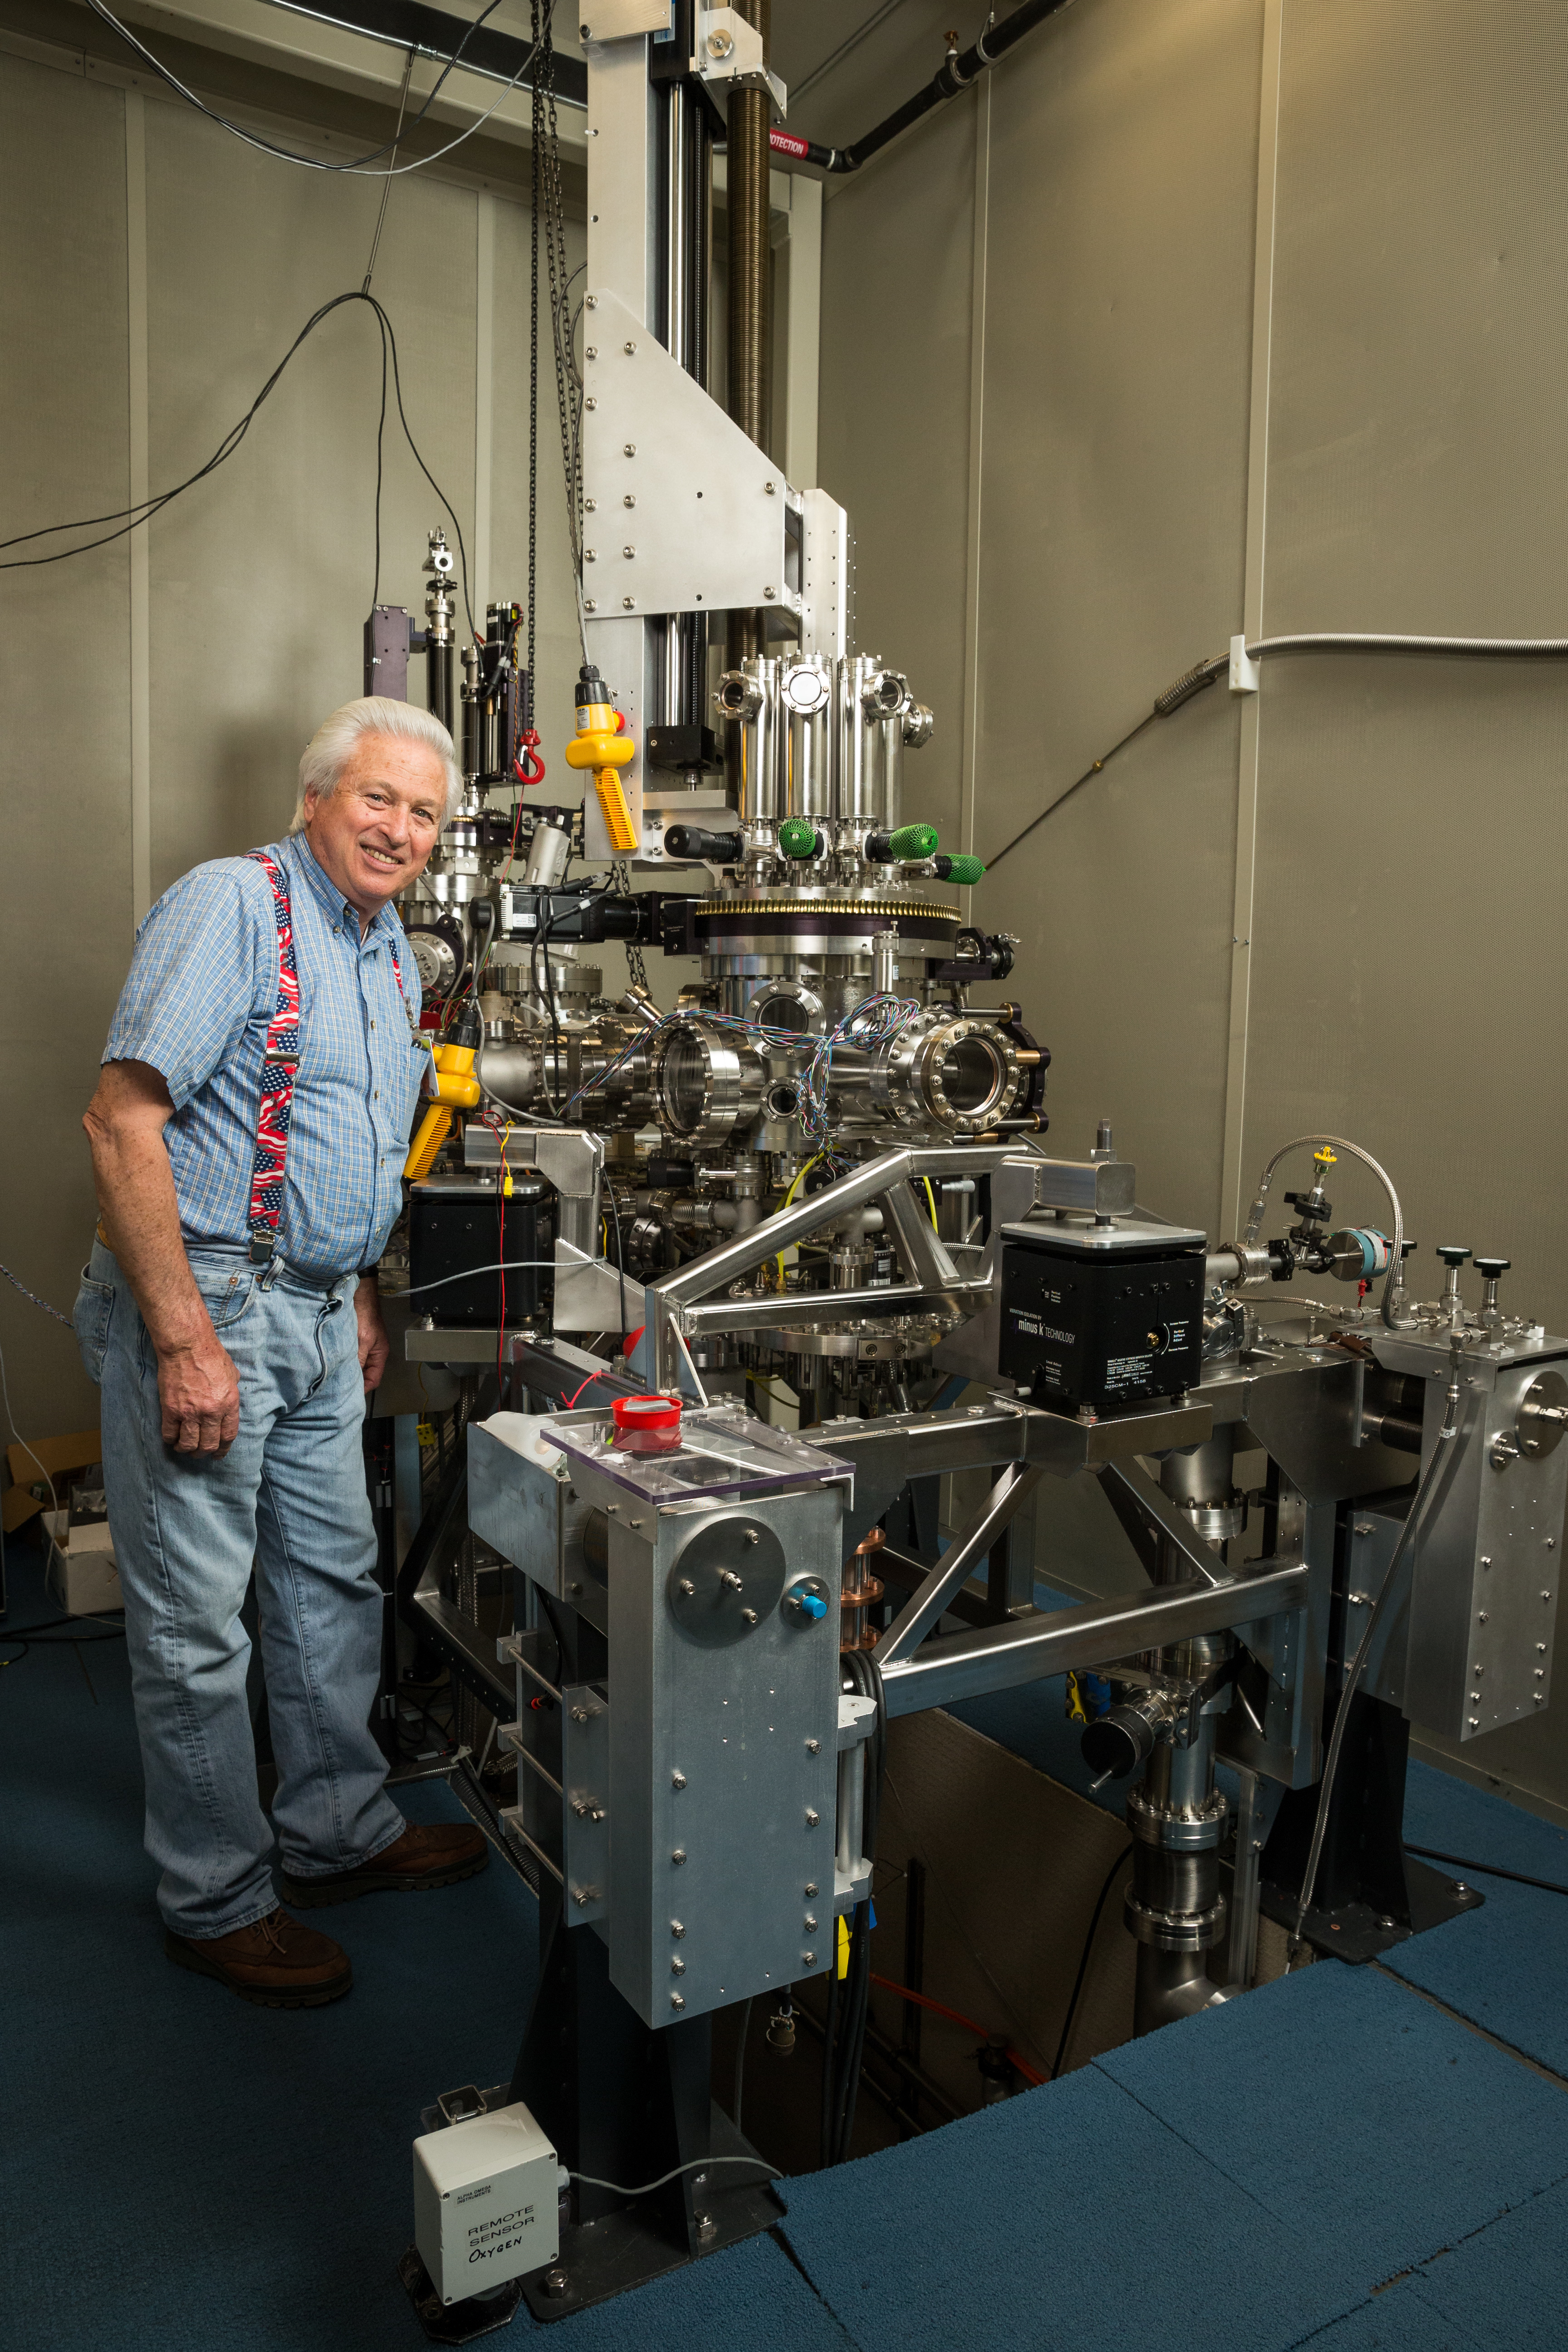 IBM can store a bit of data on a single atom, but the scanning tunneling microscope needed to do so is vastly larger. Here IBM microscope mechanic Bruce Melior stands by the device.